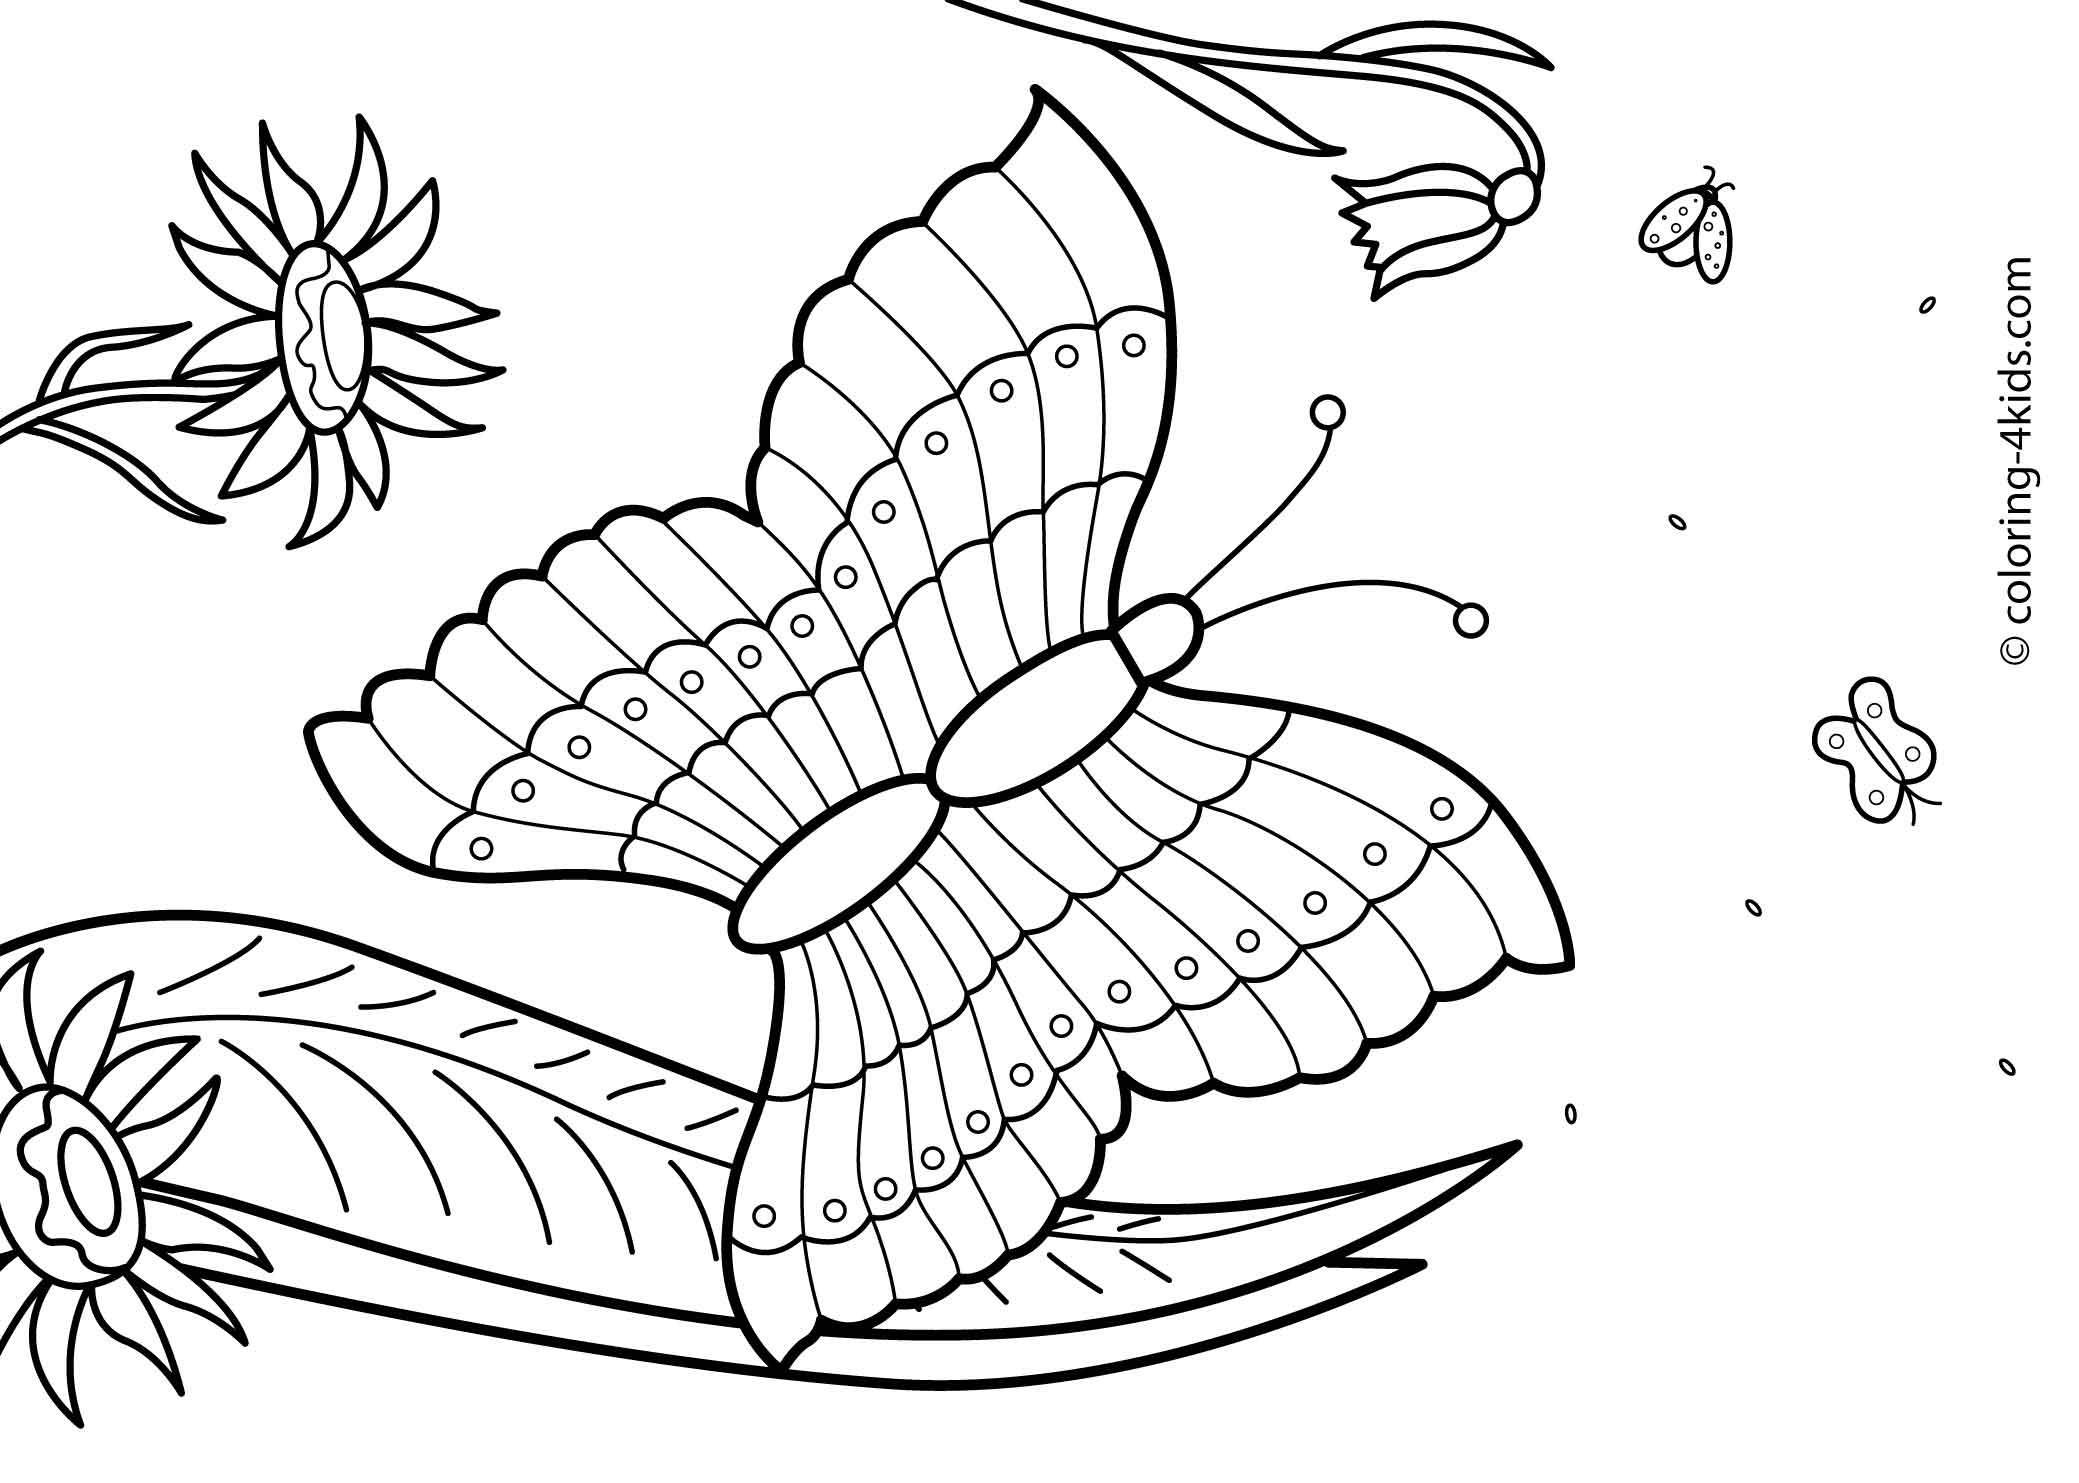 Printable Summer Coloring Pages
 27 Summer season coloring pages part 2